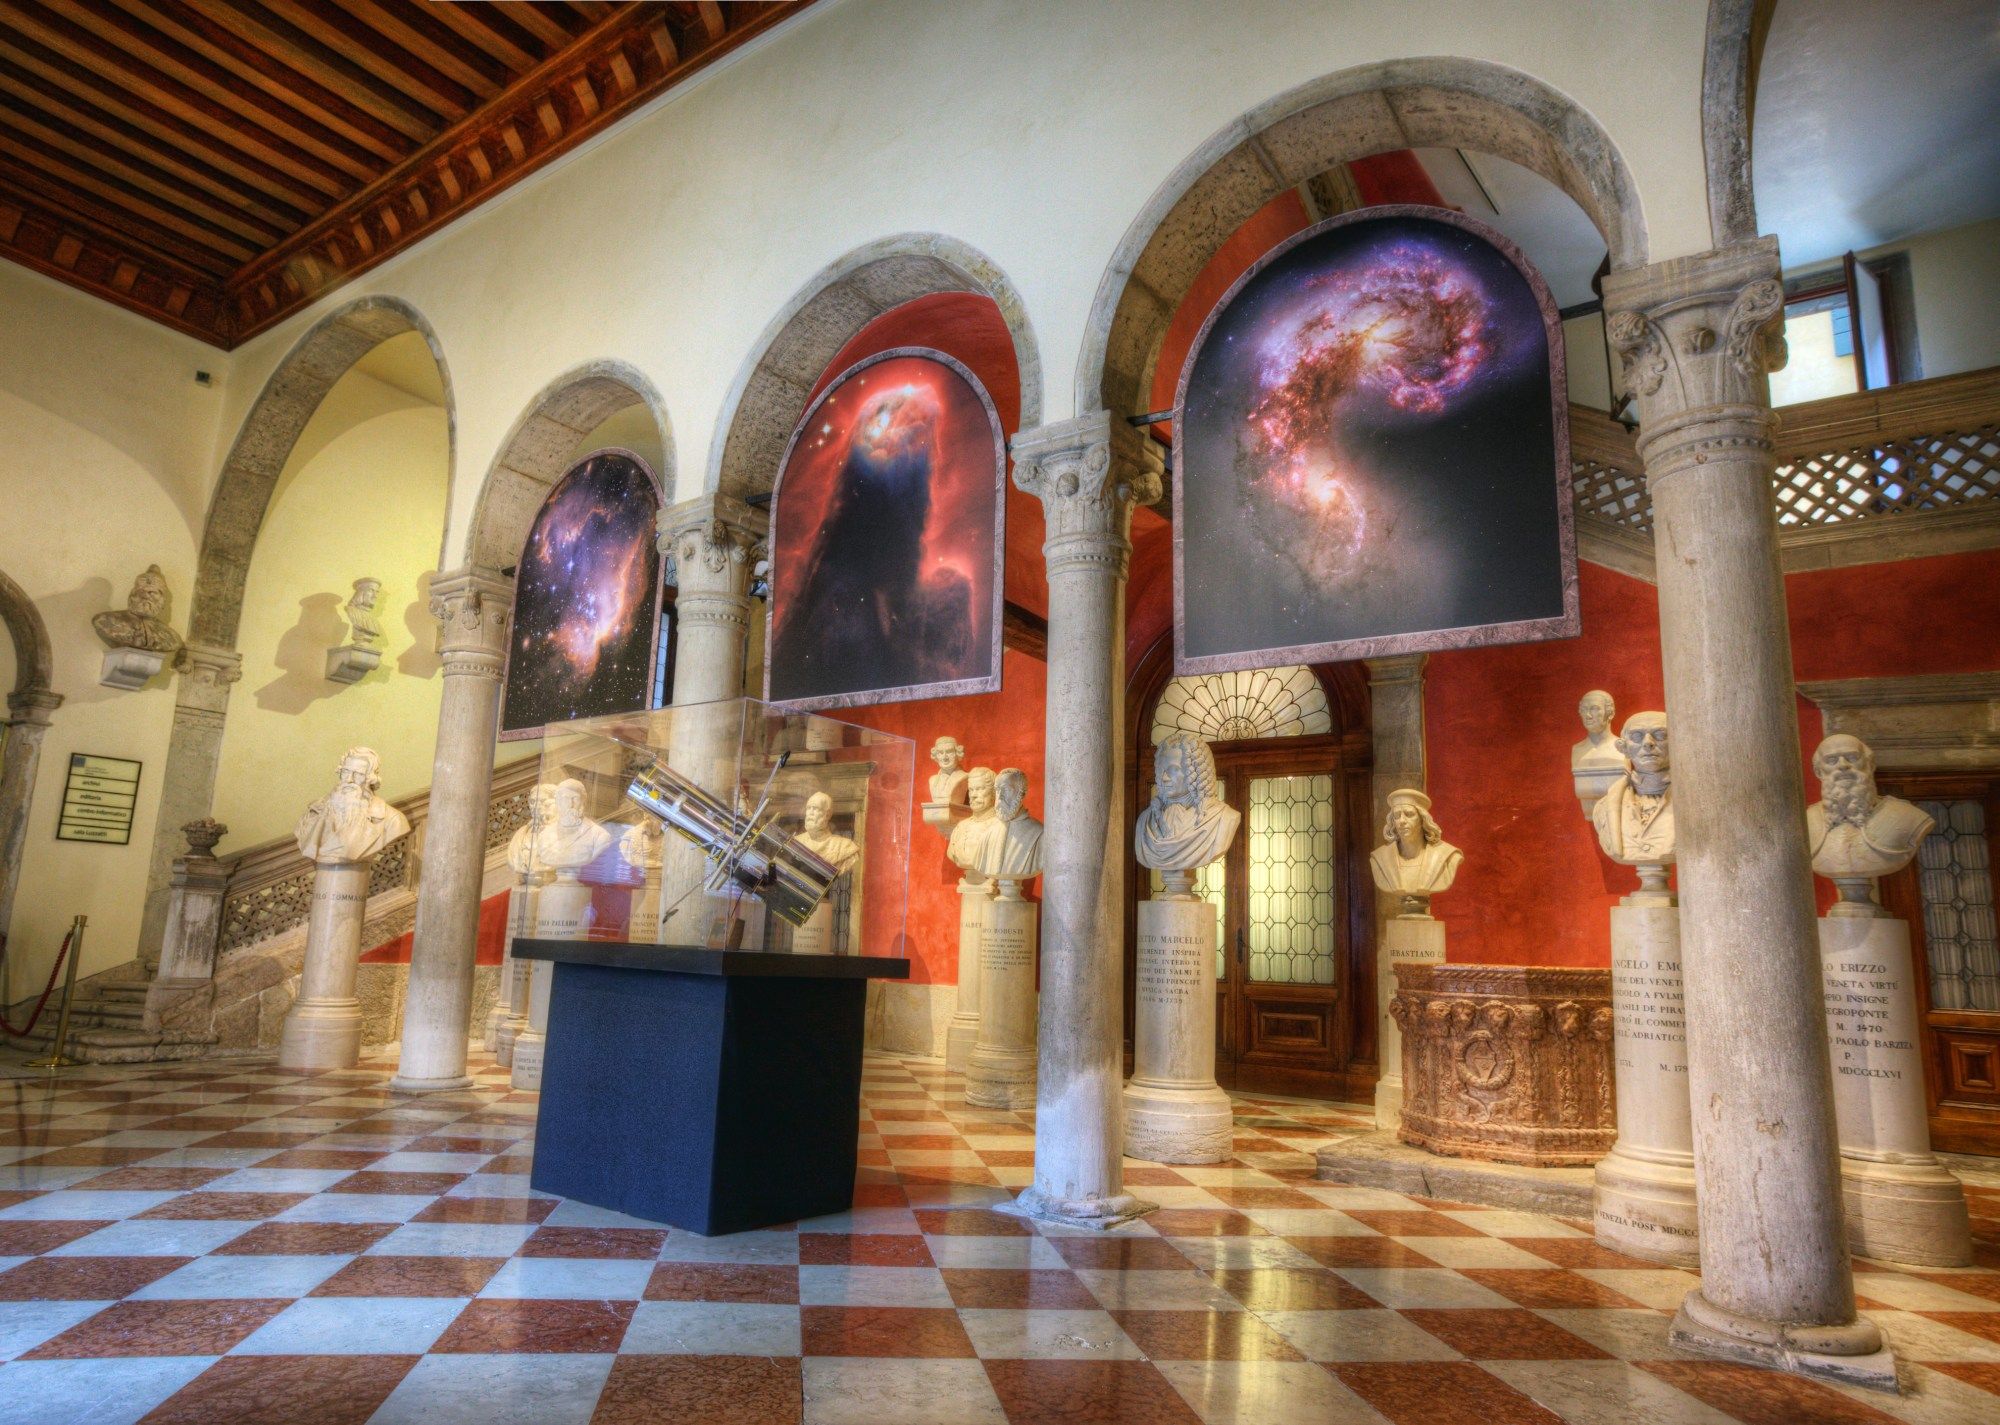 Hubble images are suspended between stone arches and hanging over classical marble busts at an art museum. A Hubble model is displayed among the statues.